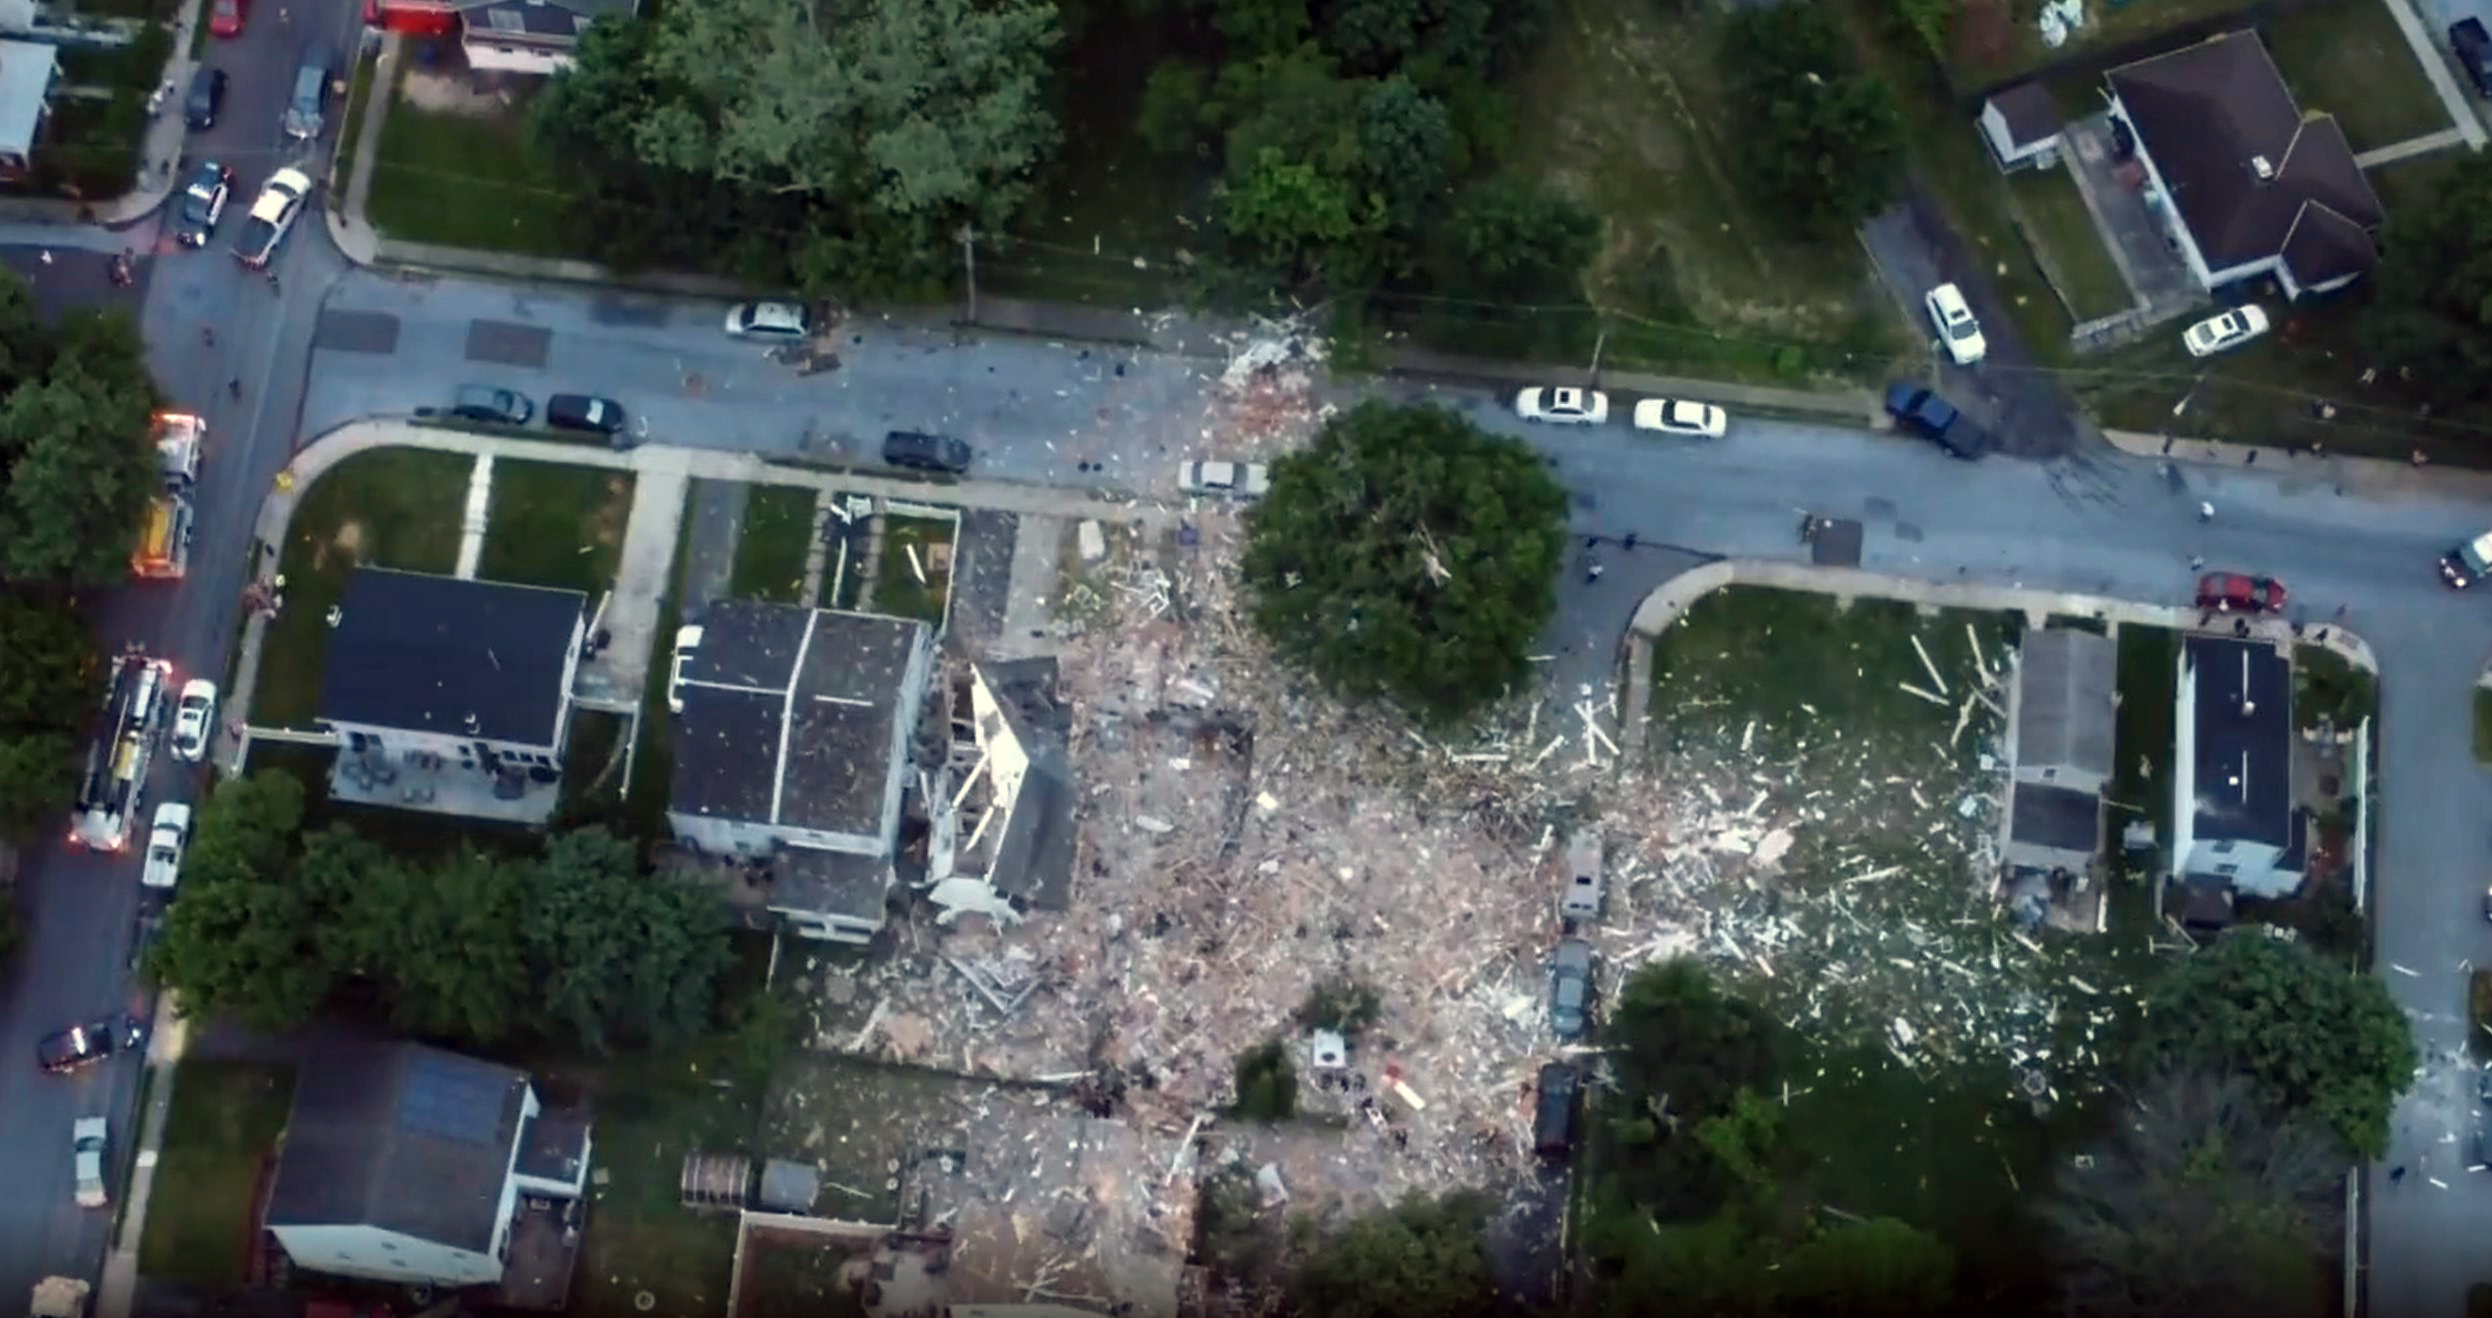 PHOTO: Drone footage shot May 27, 2022, shows wreckage from an explosion in Pottstown, Penn.